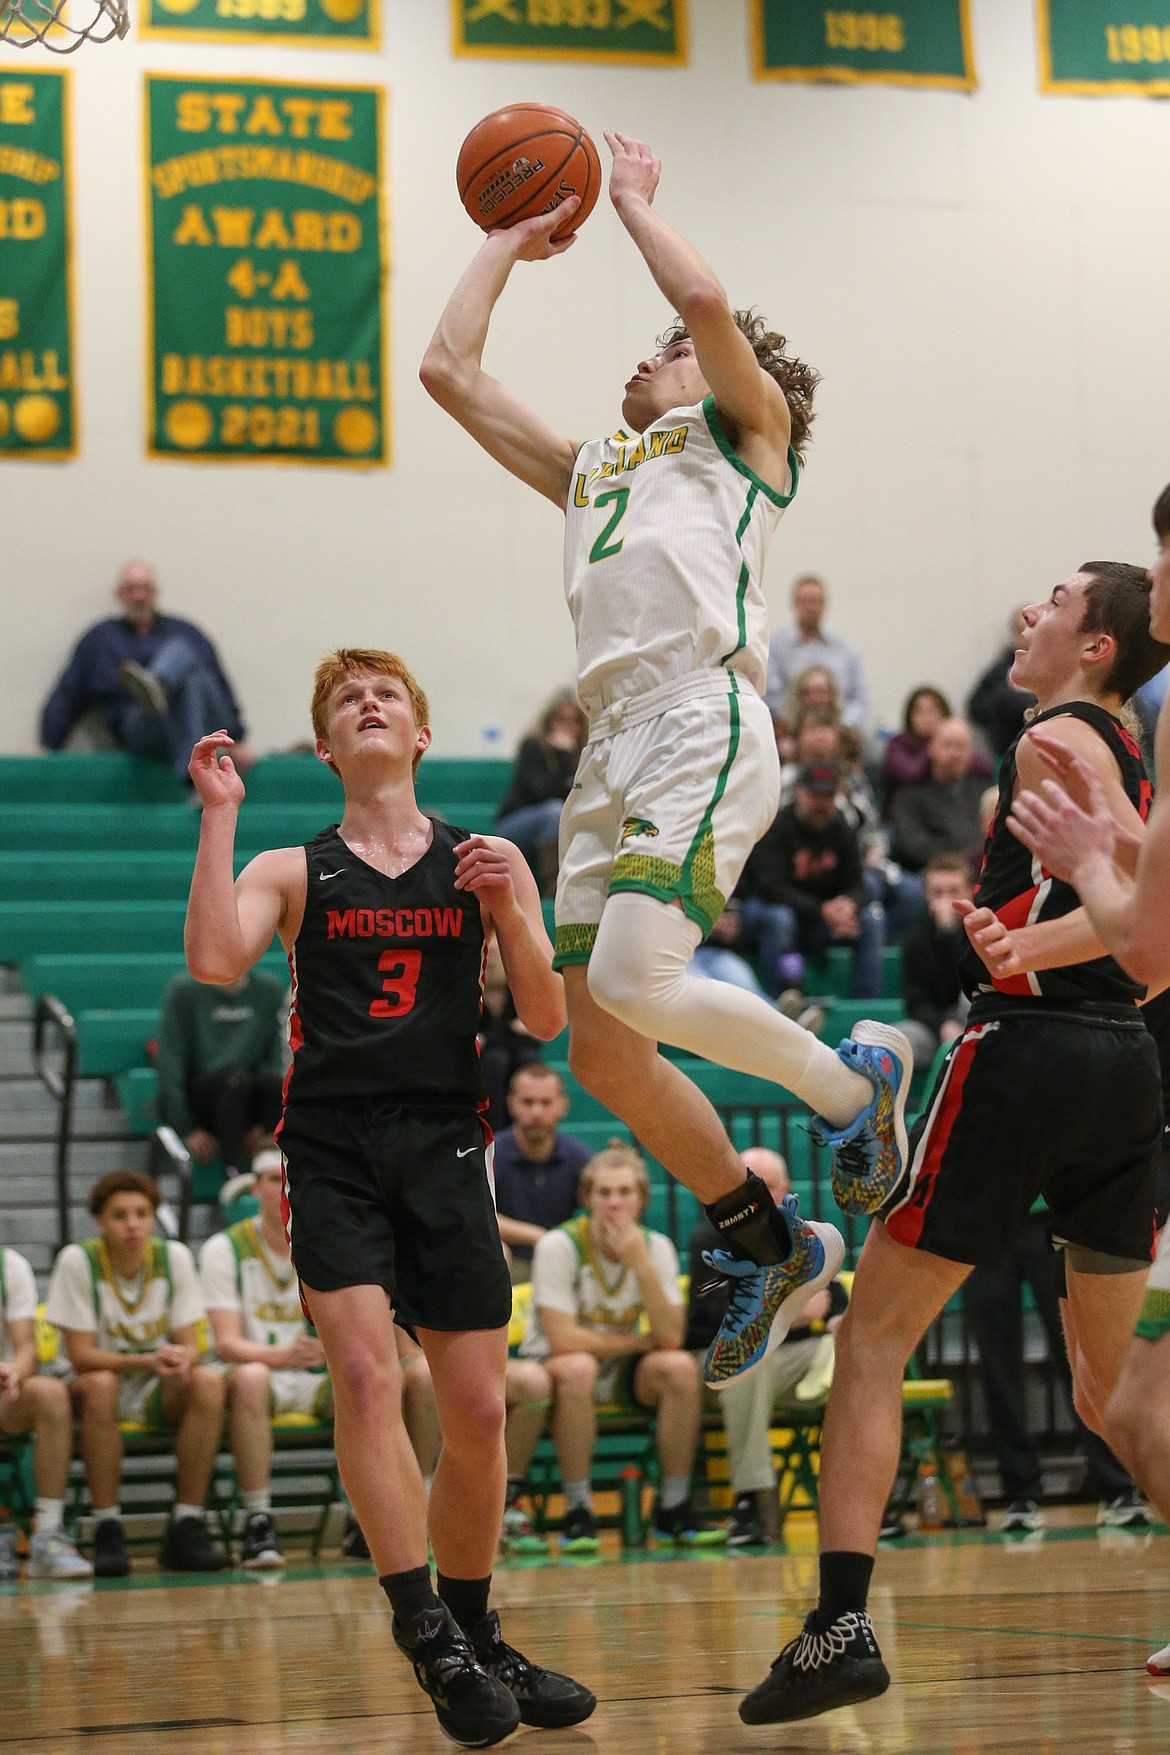 JASON DUCHOW PHOTOGRAPHY
Nick Nowell (2) of Lakeland goes up for a shot against Moscow on Friday night at Hawk Court in Rathdrum.